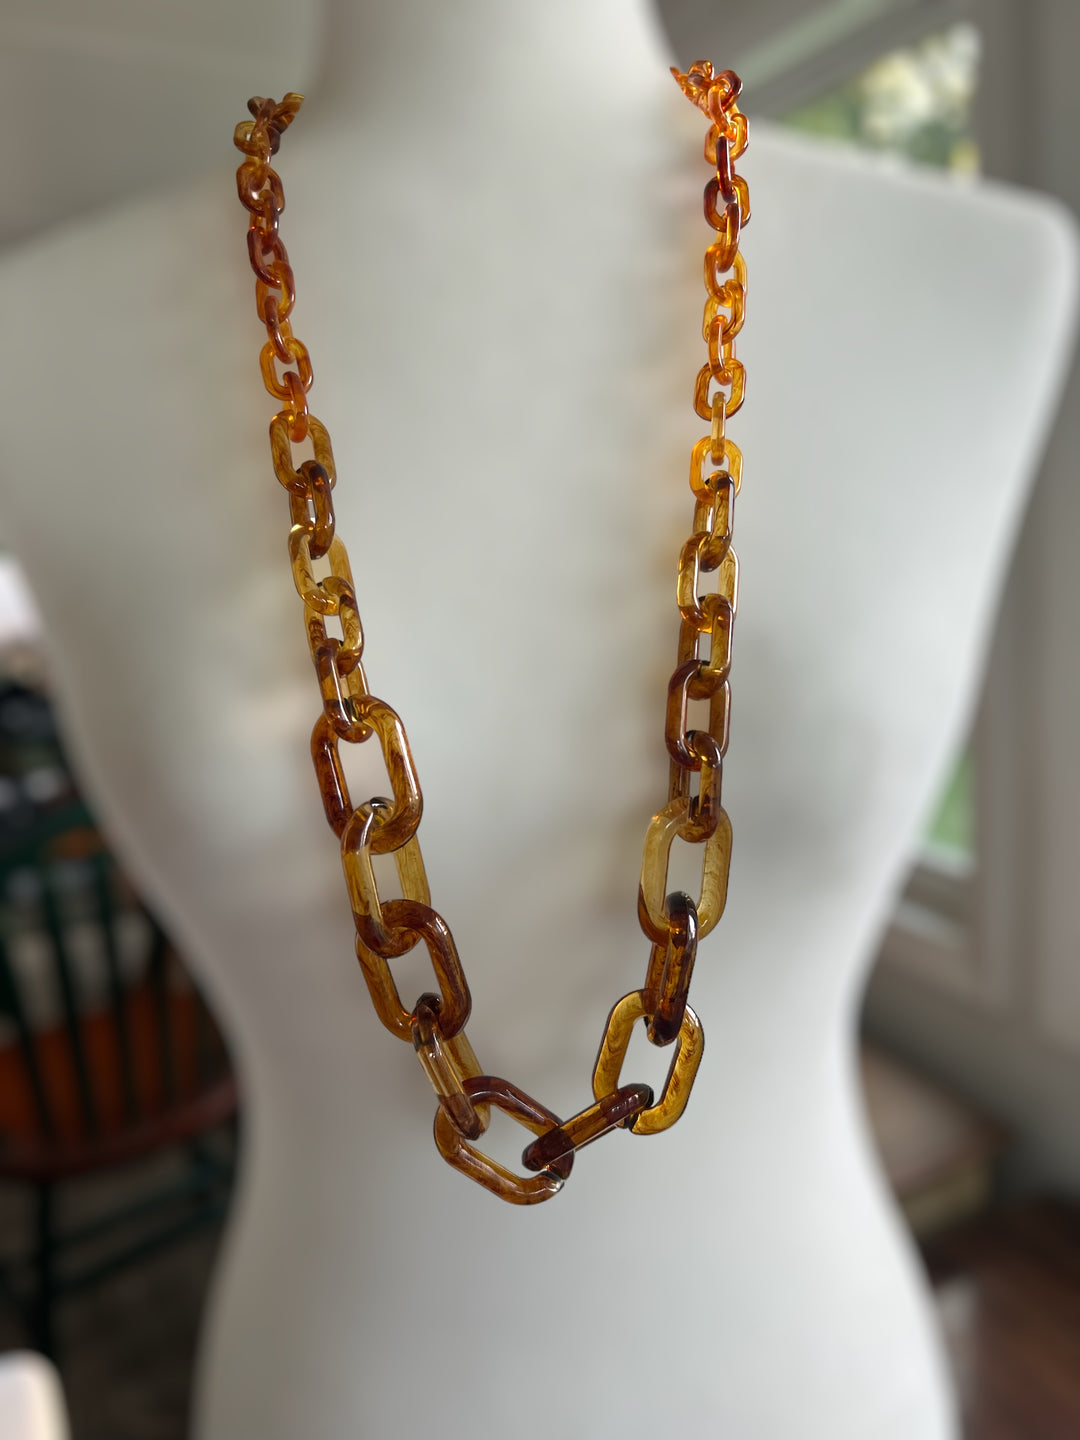 36” Long Single Strand Acrylic Amber-look Chain Link Necklace Set with Extender Chain and Matching Link Dangle Earrings